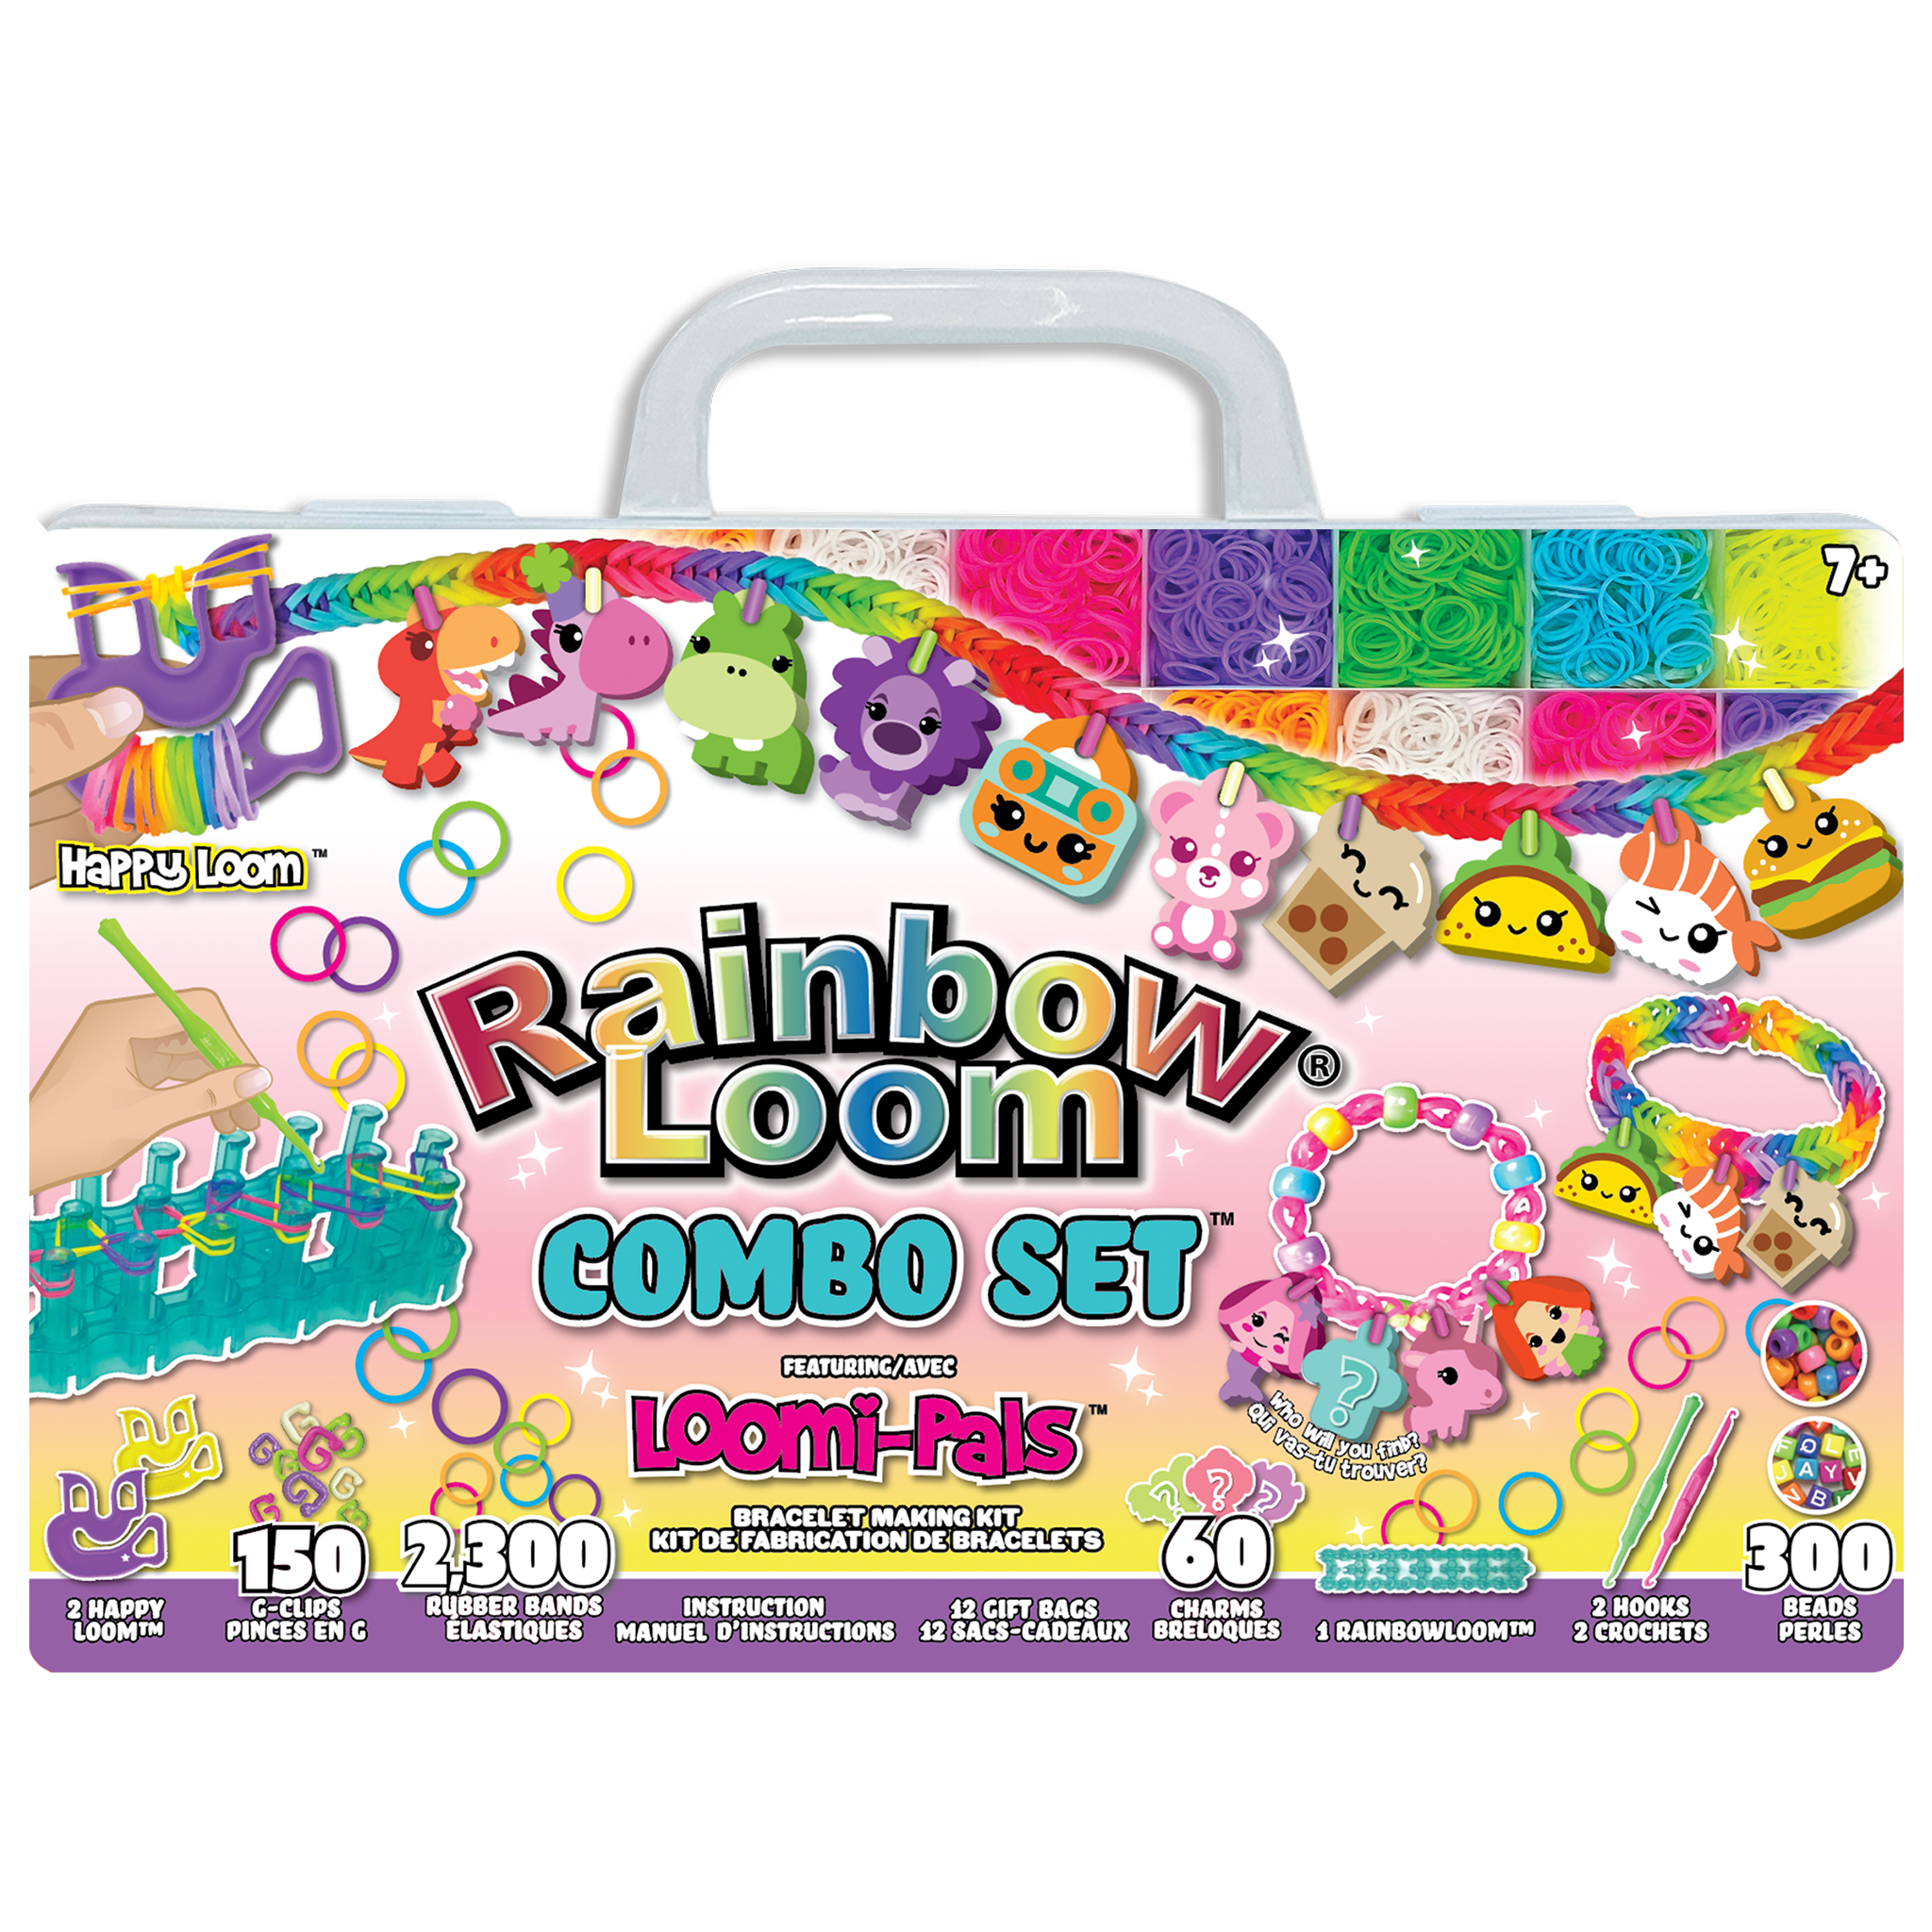 Rainbow Loom® Loomi-Pals Dino Collectible, Features 30 Mystery Cute Dino  Themed Charms and 600 Colorful Rubber Bands All in a RESEALABLE Bag, Great